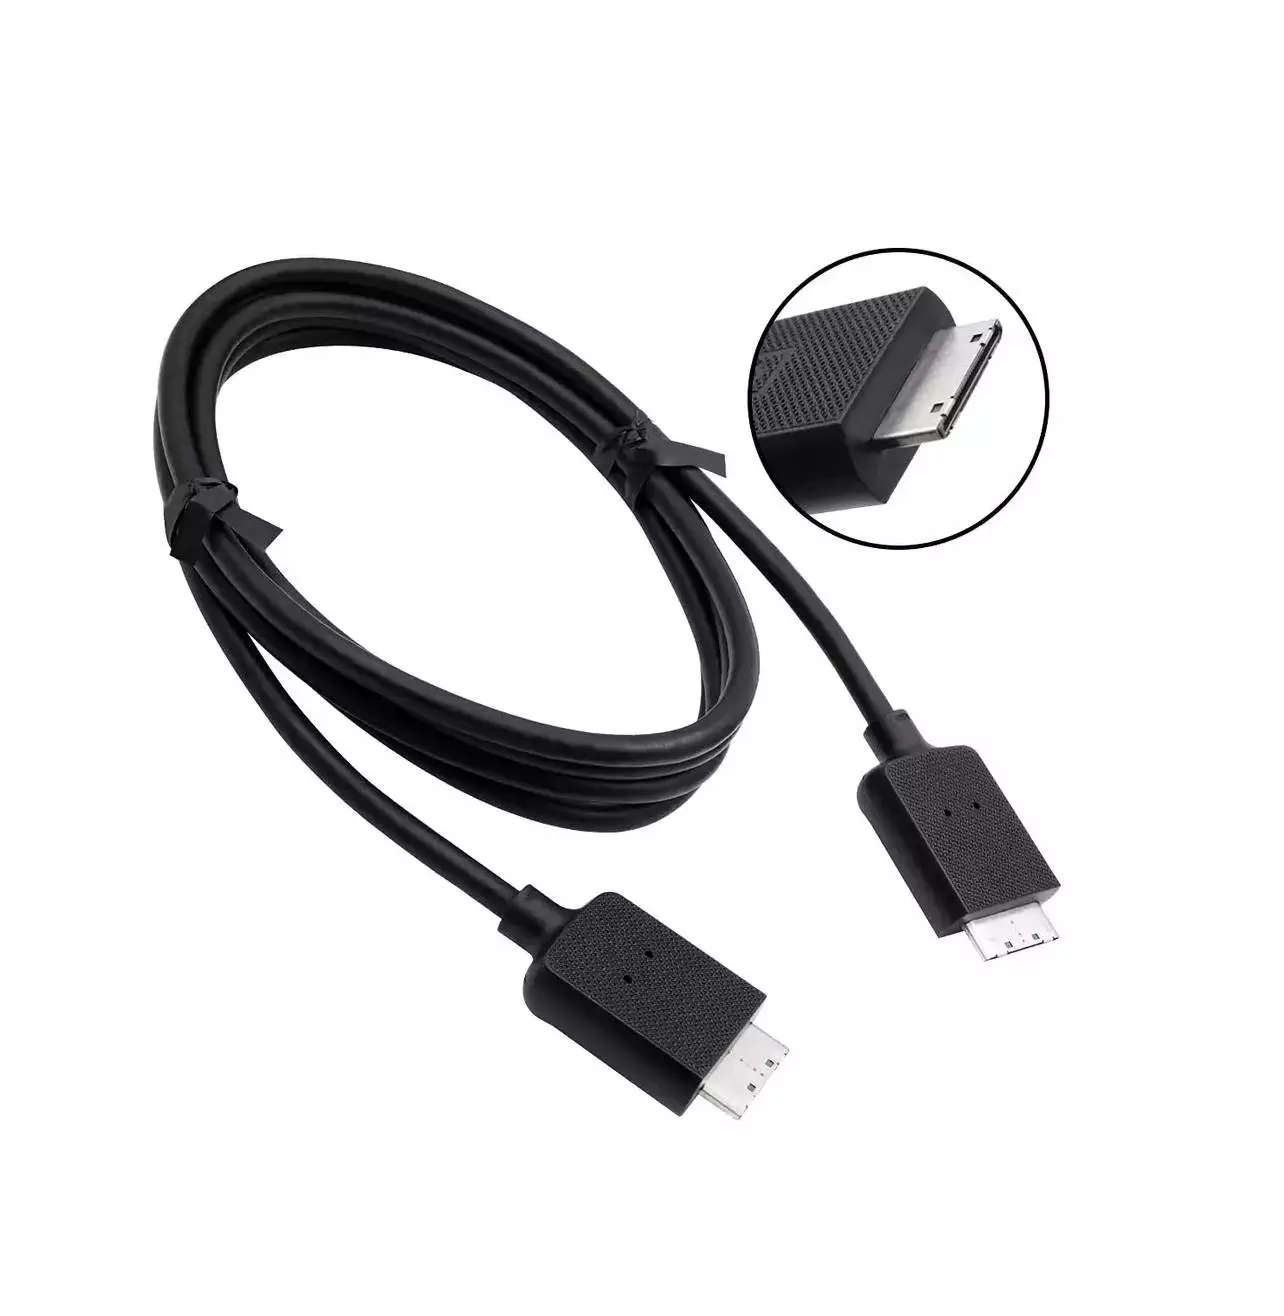 3 m High Speed True 4K HDMI Cable with Ethernet - 2L-7D03H, ATEN